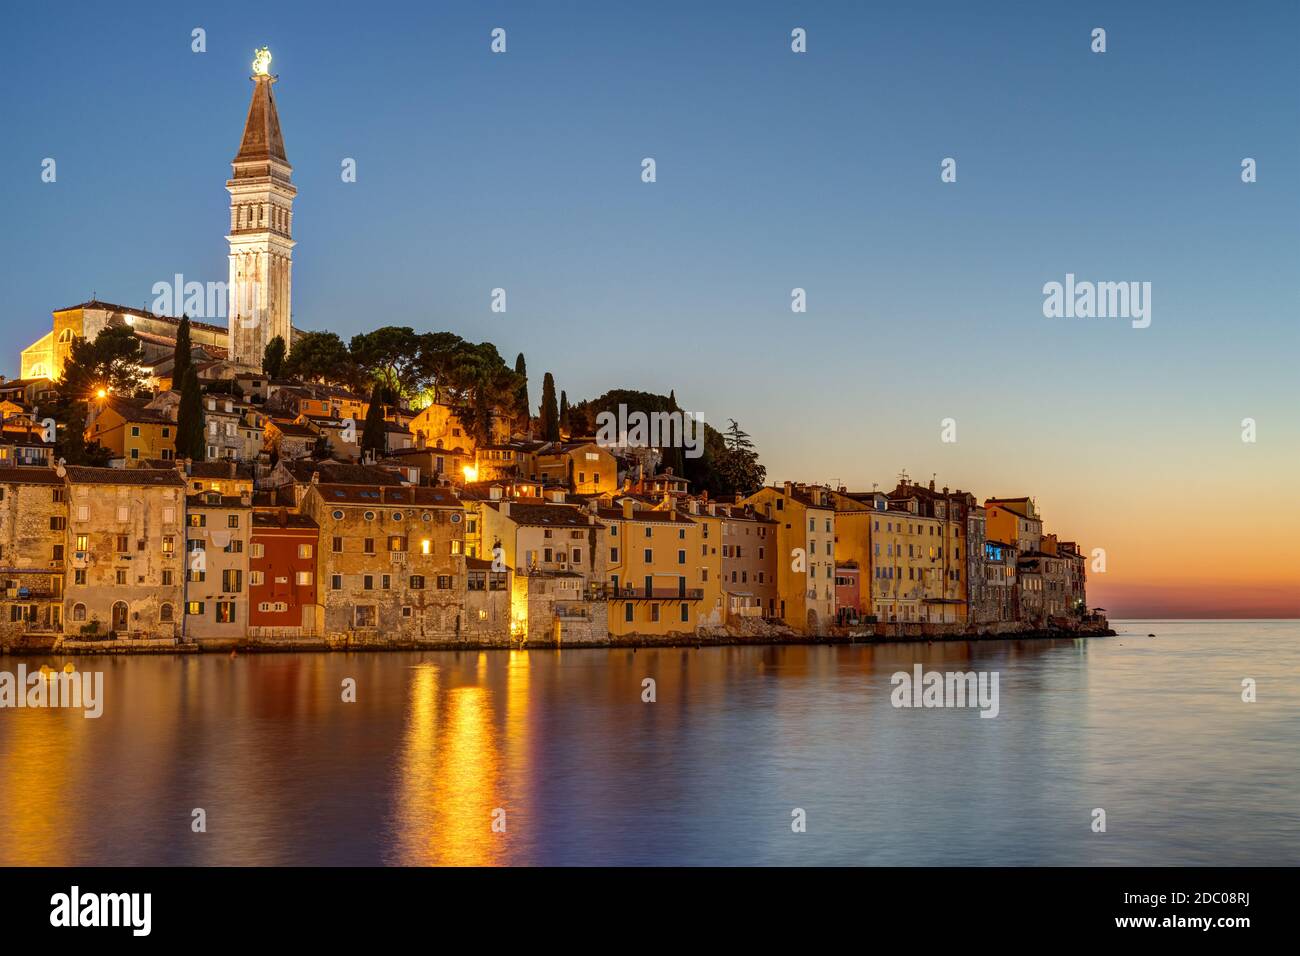 The idyllic old town of Rovinj in Croatia after sunset Stock Photo